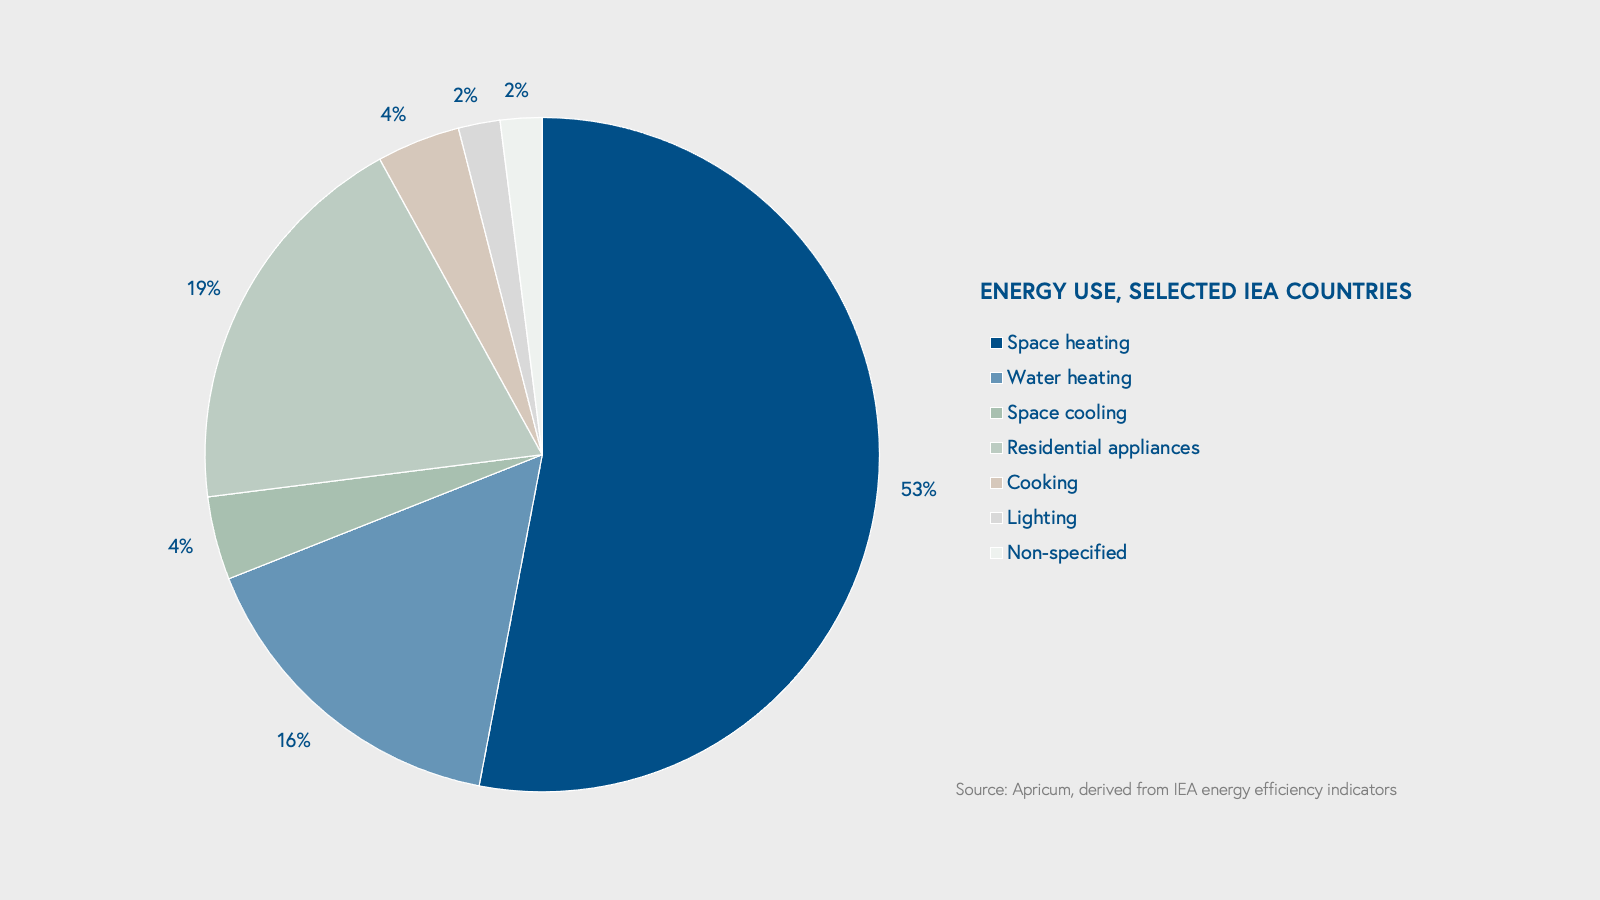 energy use, selected IEA countries 